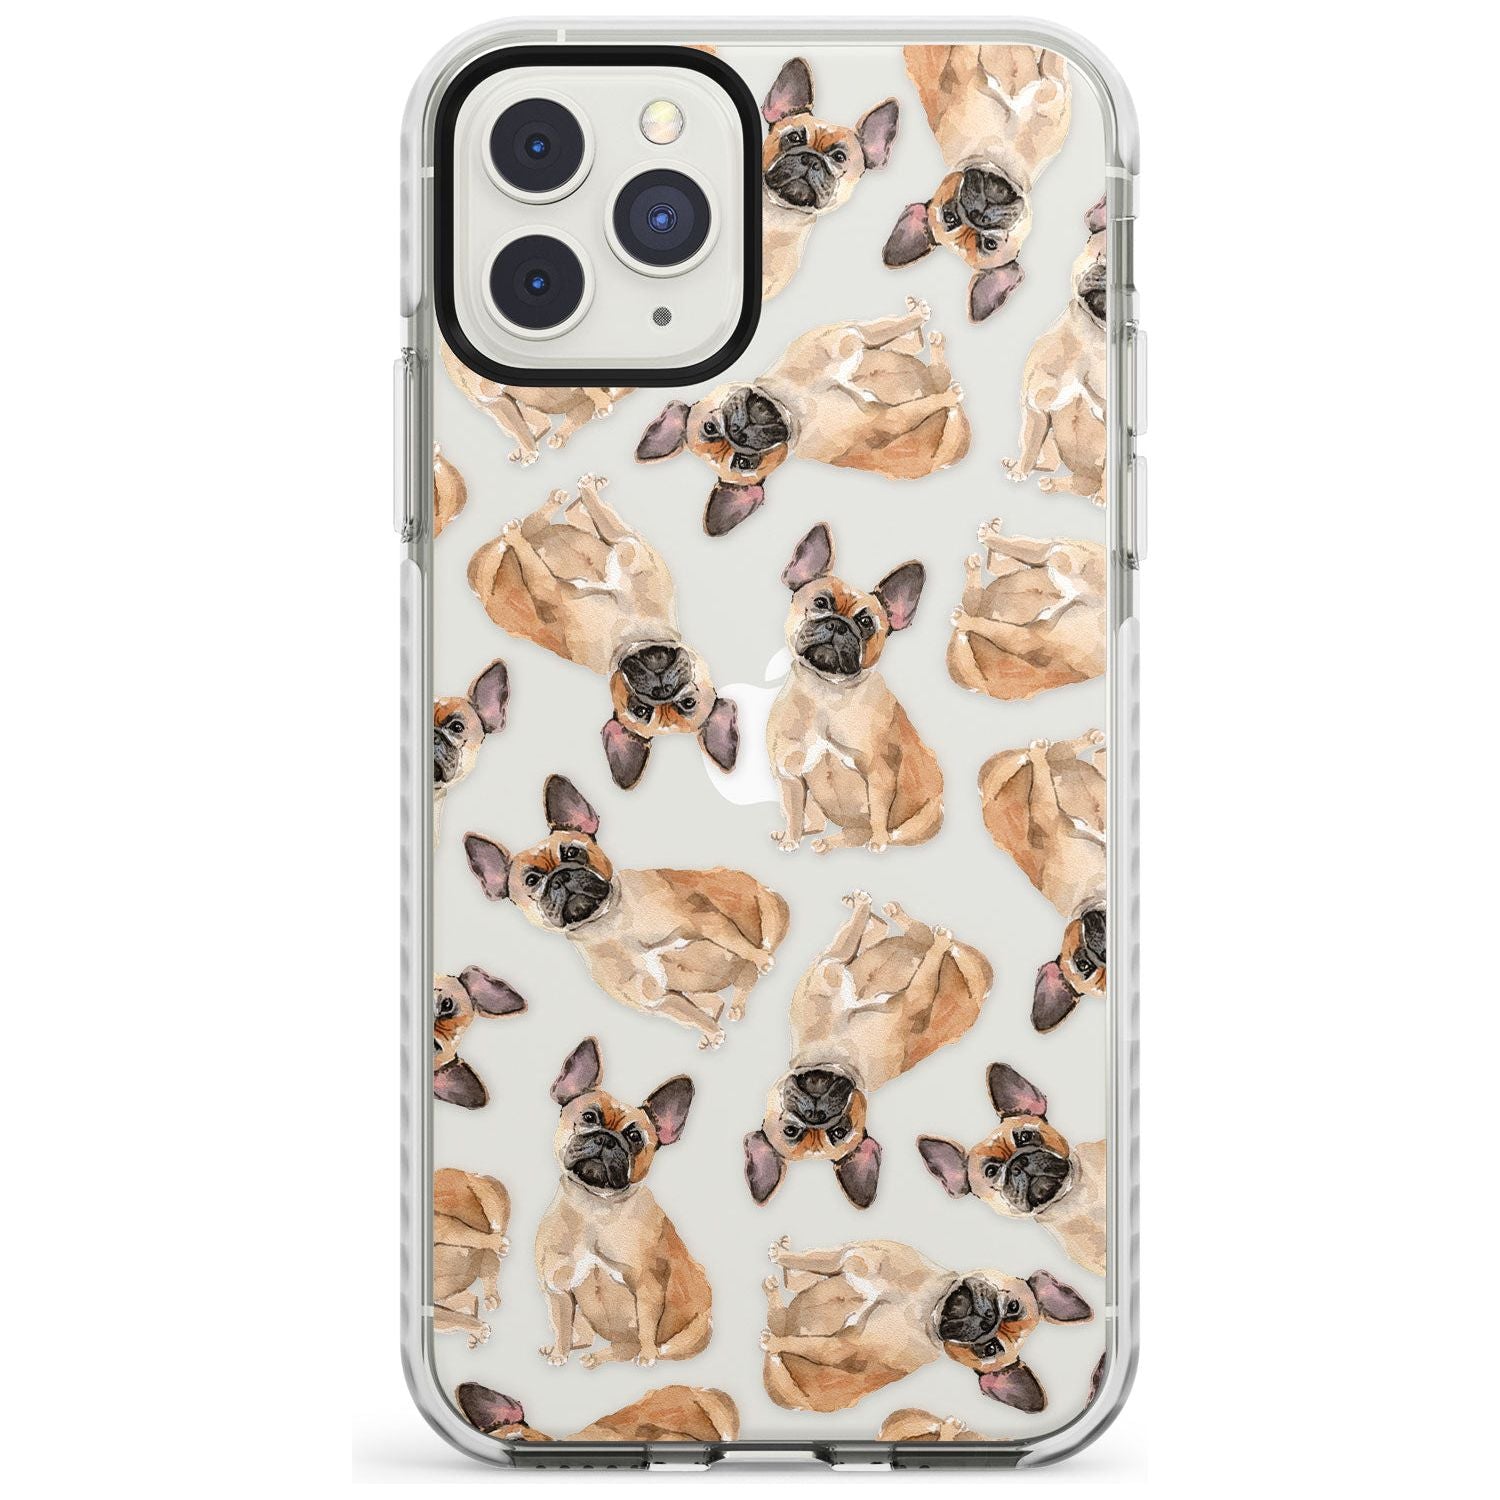 French Bulldog Watercolour Dog Pattern Impact Phone Case for iPhone 11 Pro Max